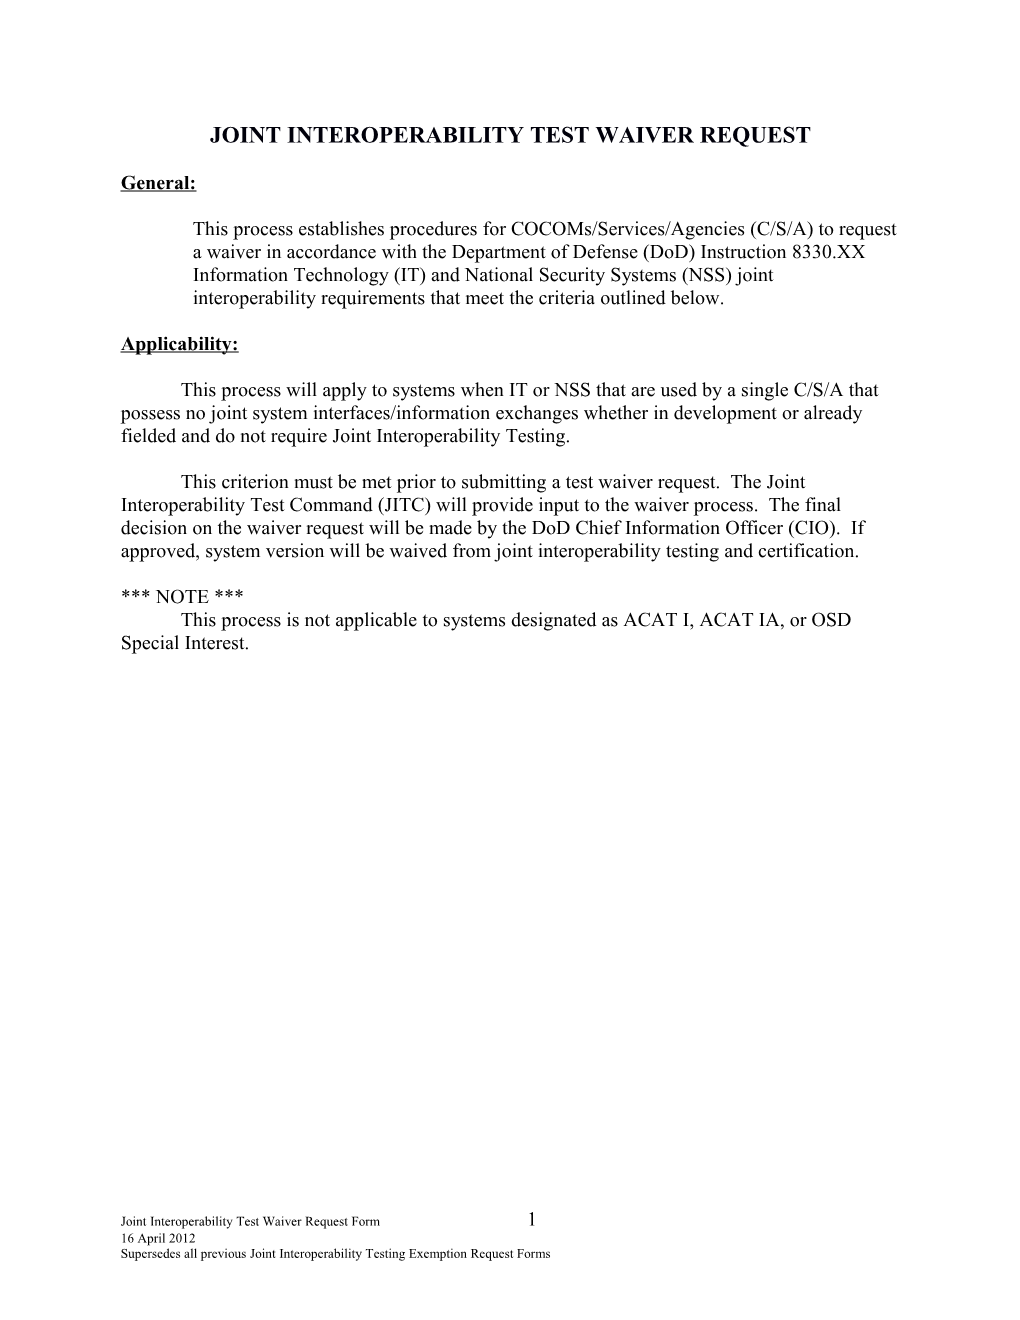 Joint Interoperability Test Waiver Request Form